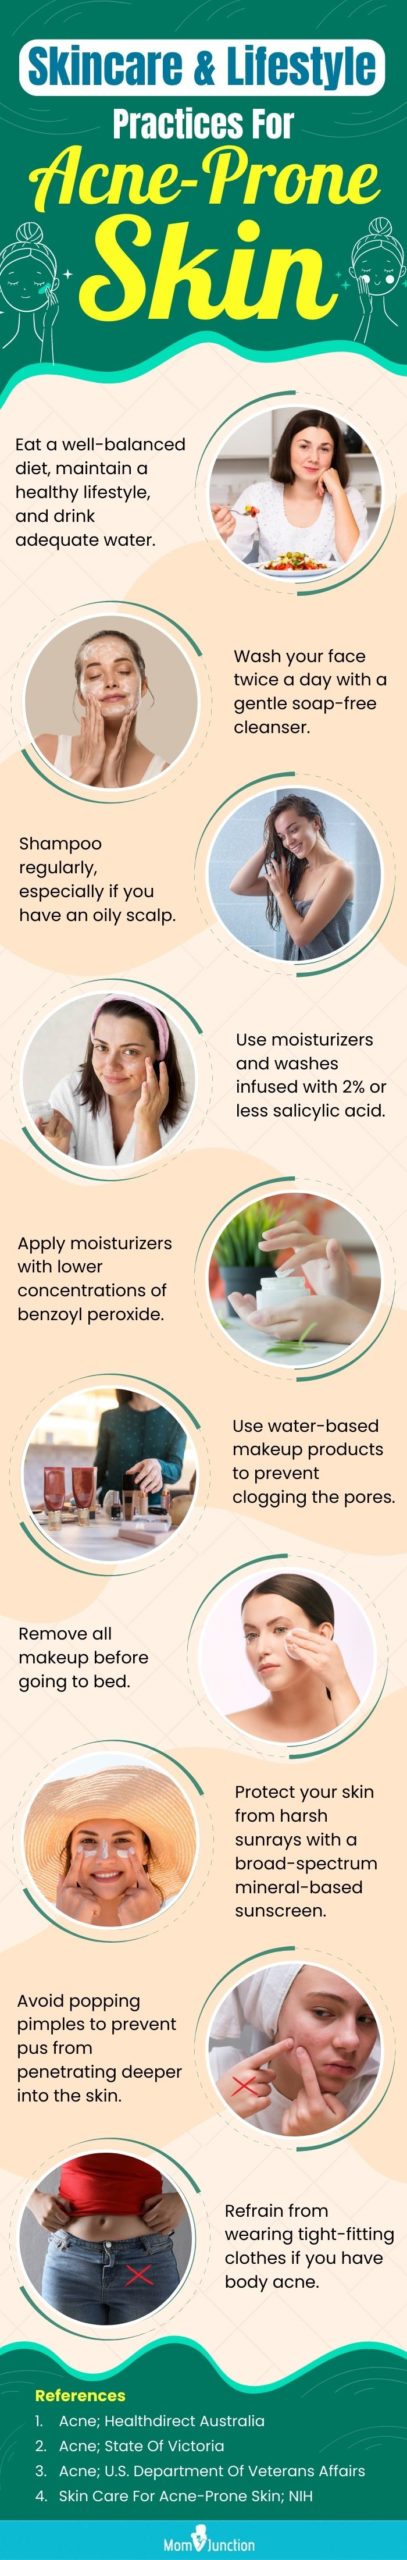 Skincare And Lifestyle Practices For Acne-Prone Skin (infographic)